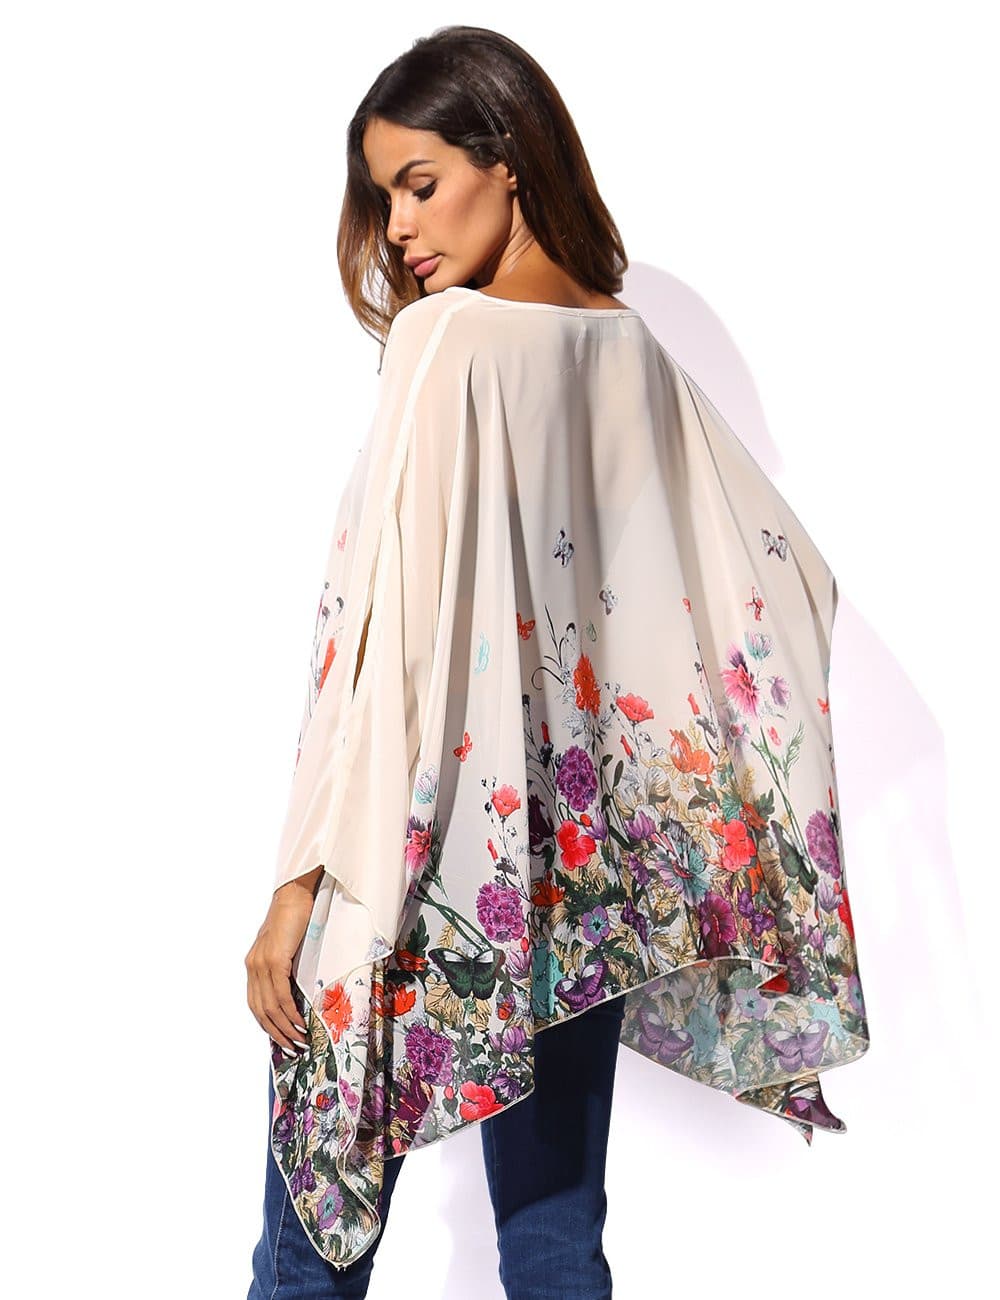 DJT Apricot Summer Floral Printed Chiffon Women's Caftan Poncho Cover Ups Tunic Tops